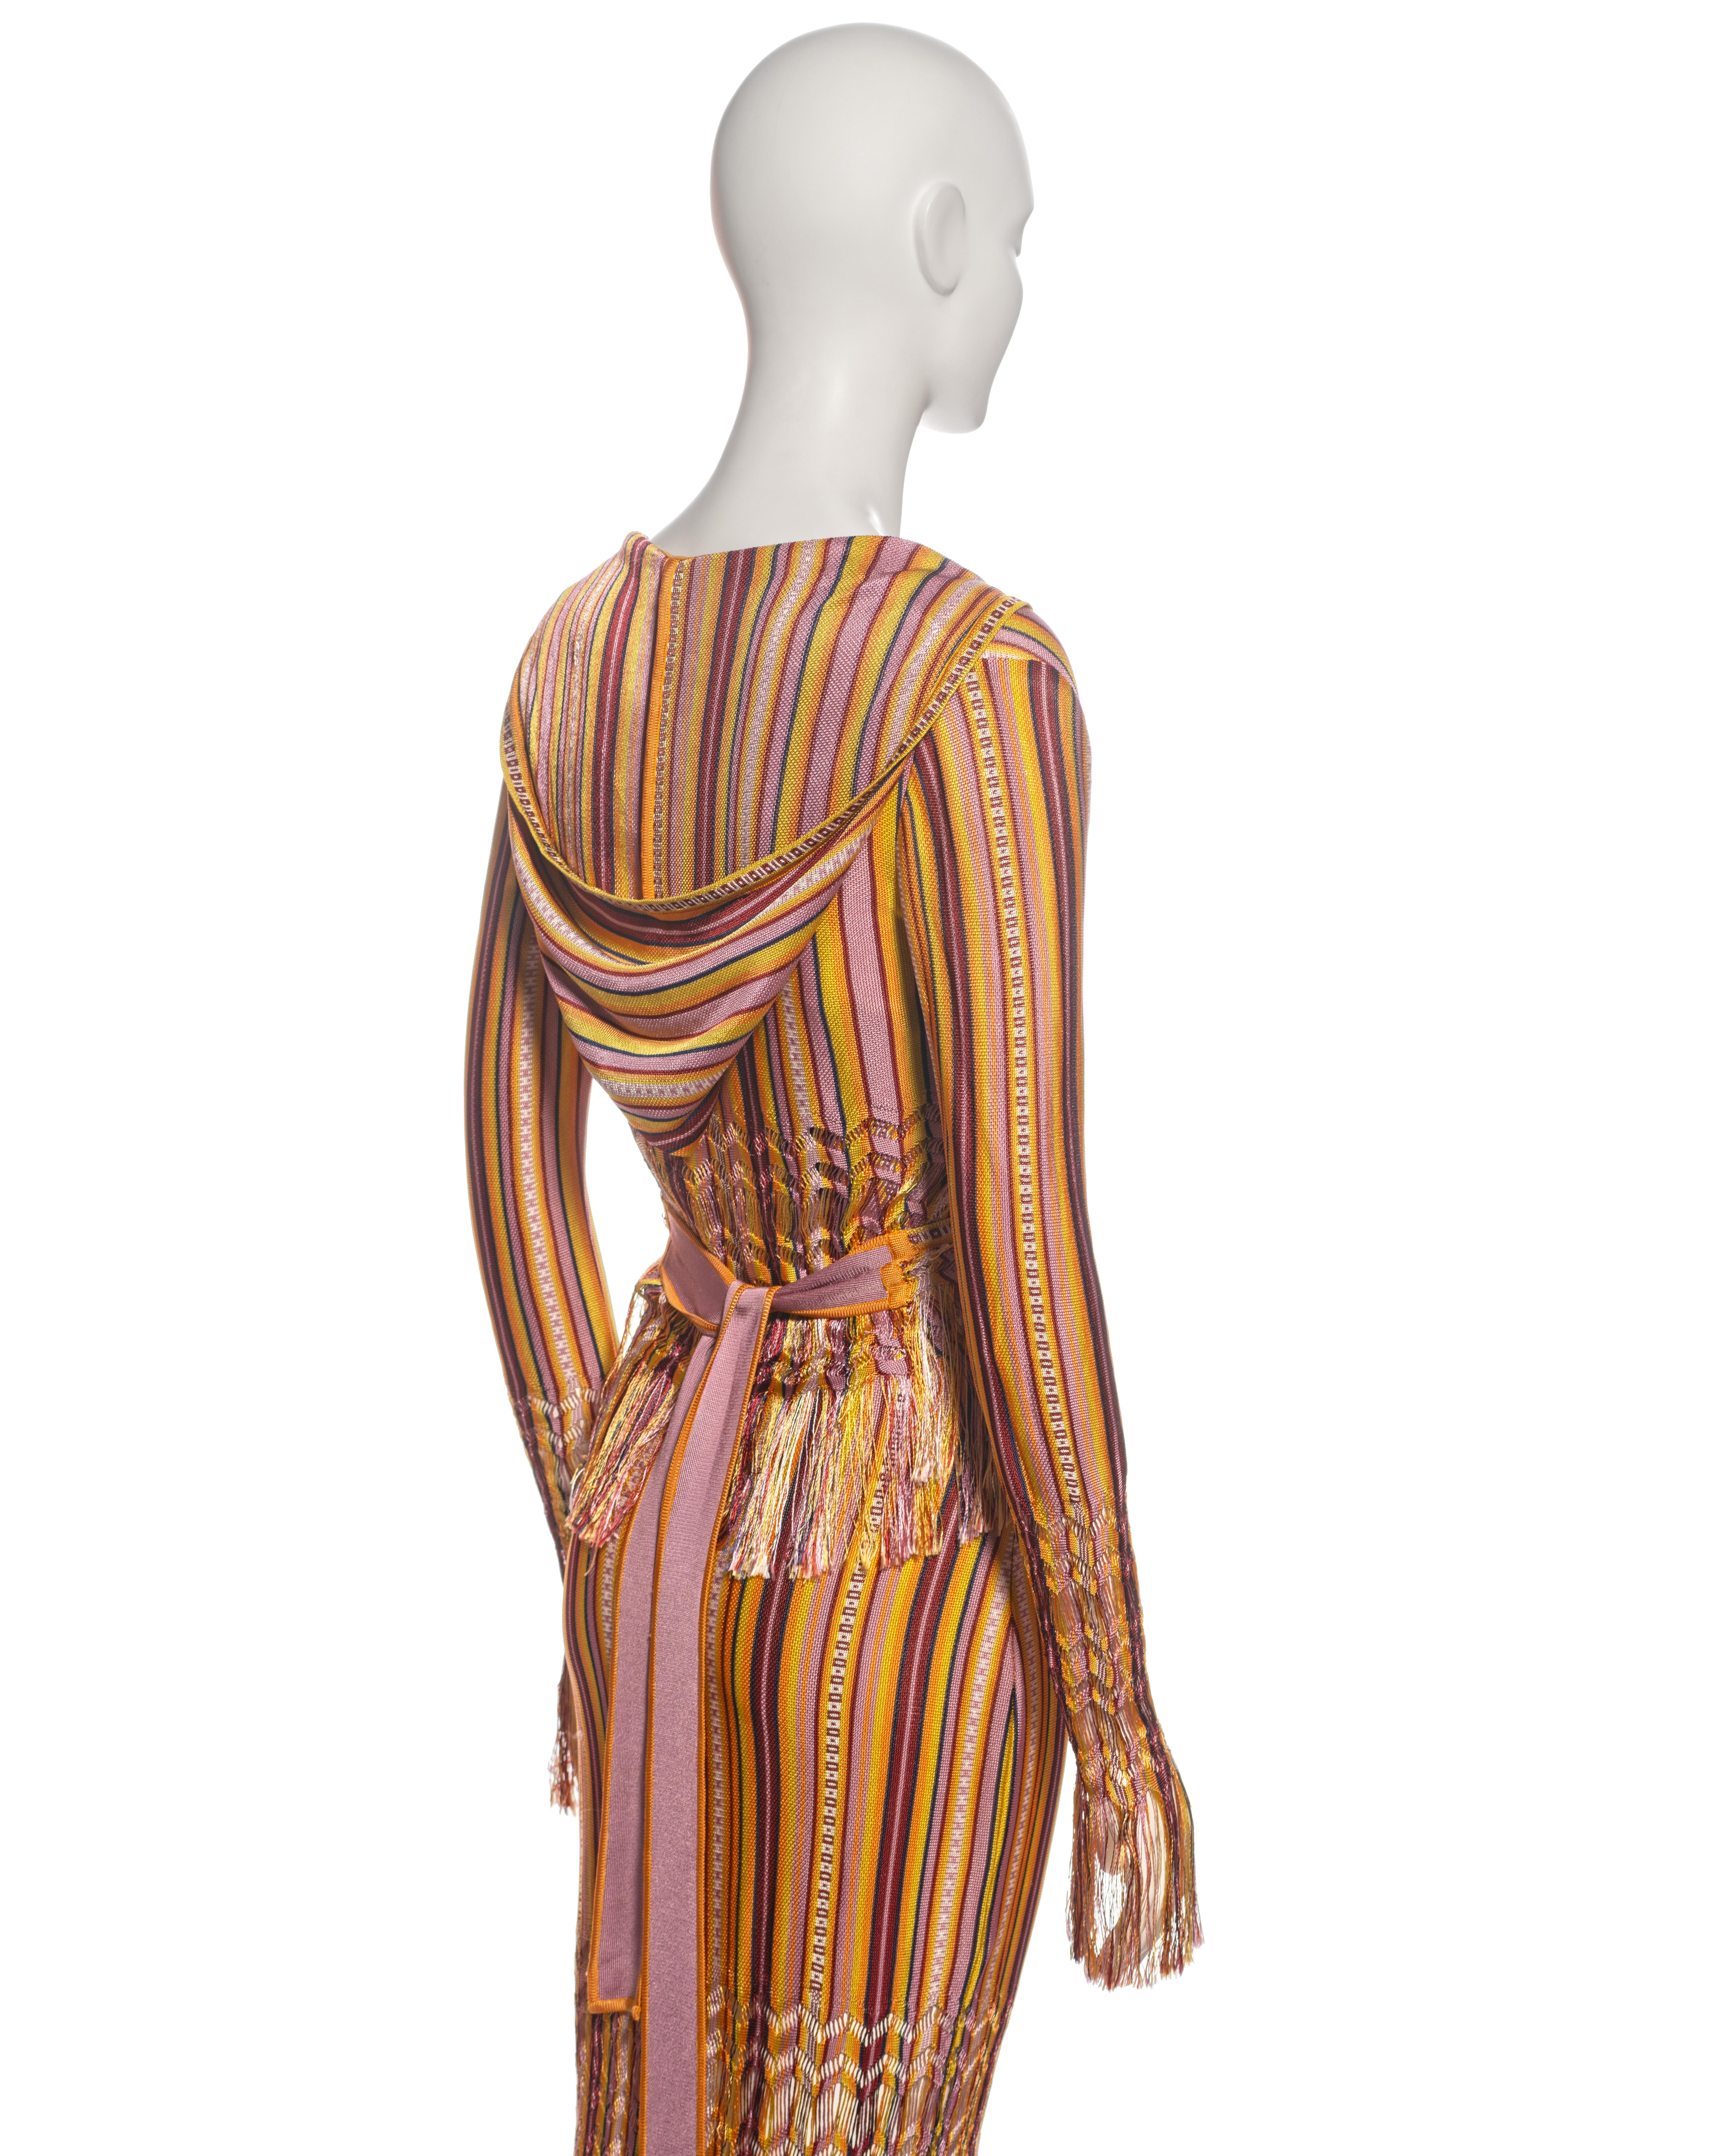 Christian Dior by John Galliano Striped Knit Maxi Dress and Cardigan, ss 2002 For Sale 6